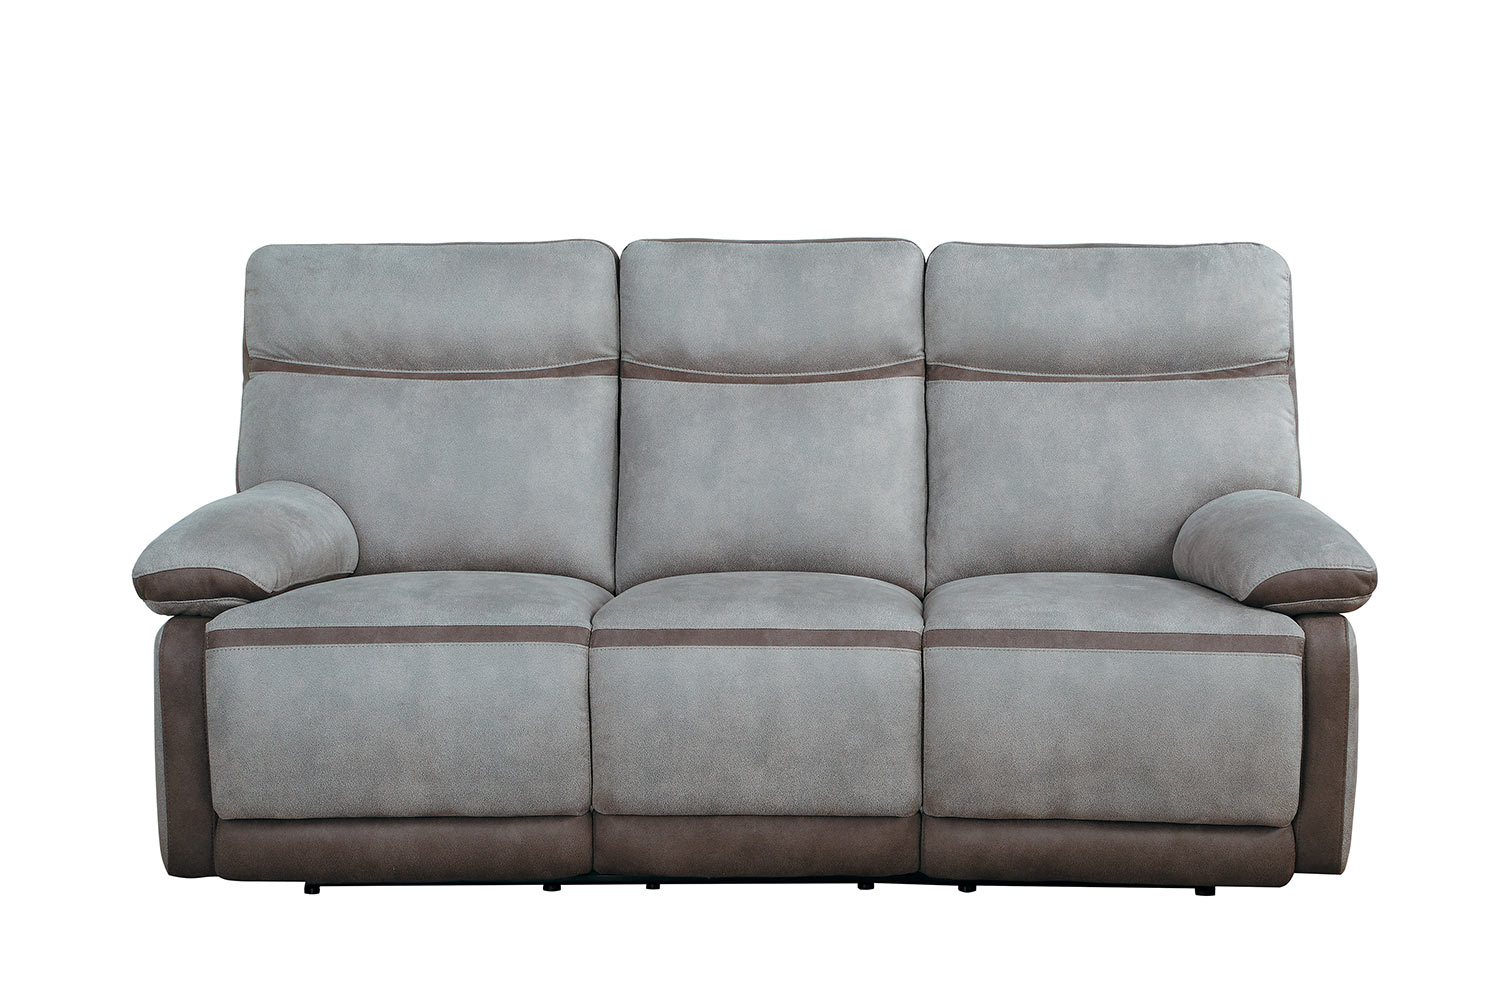 Homelegance Barilotto Power Double Reclining Sofa With Power Headrests - Gray